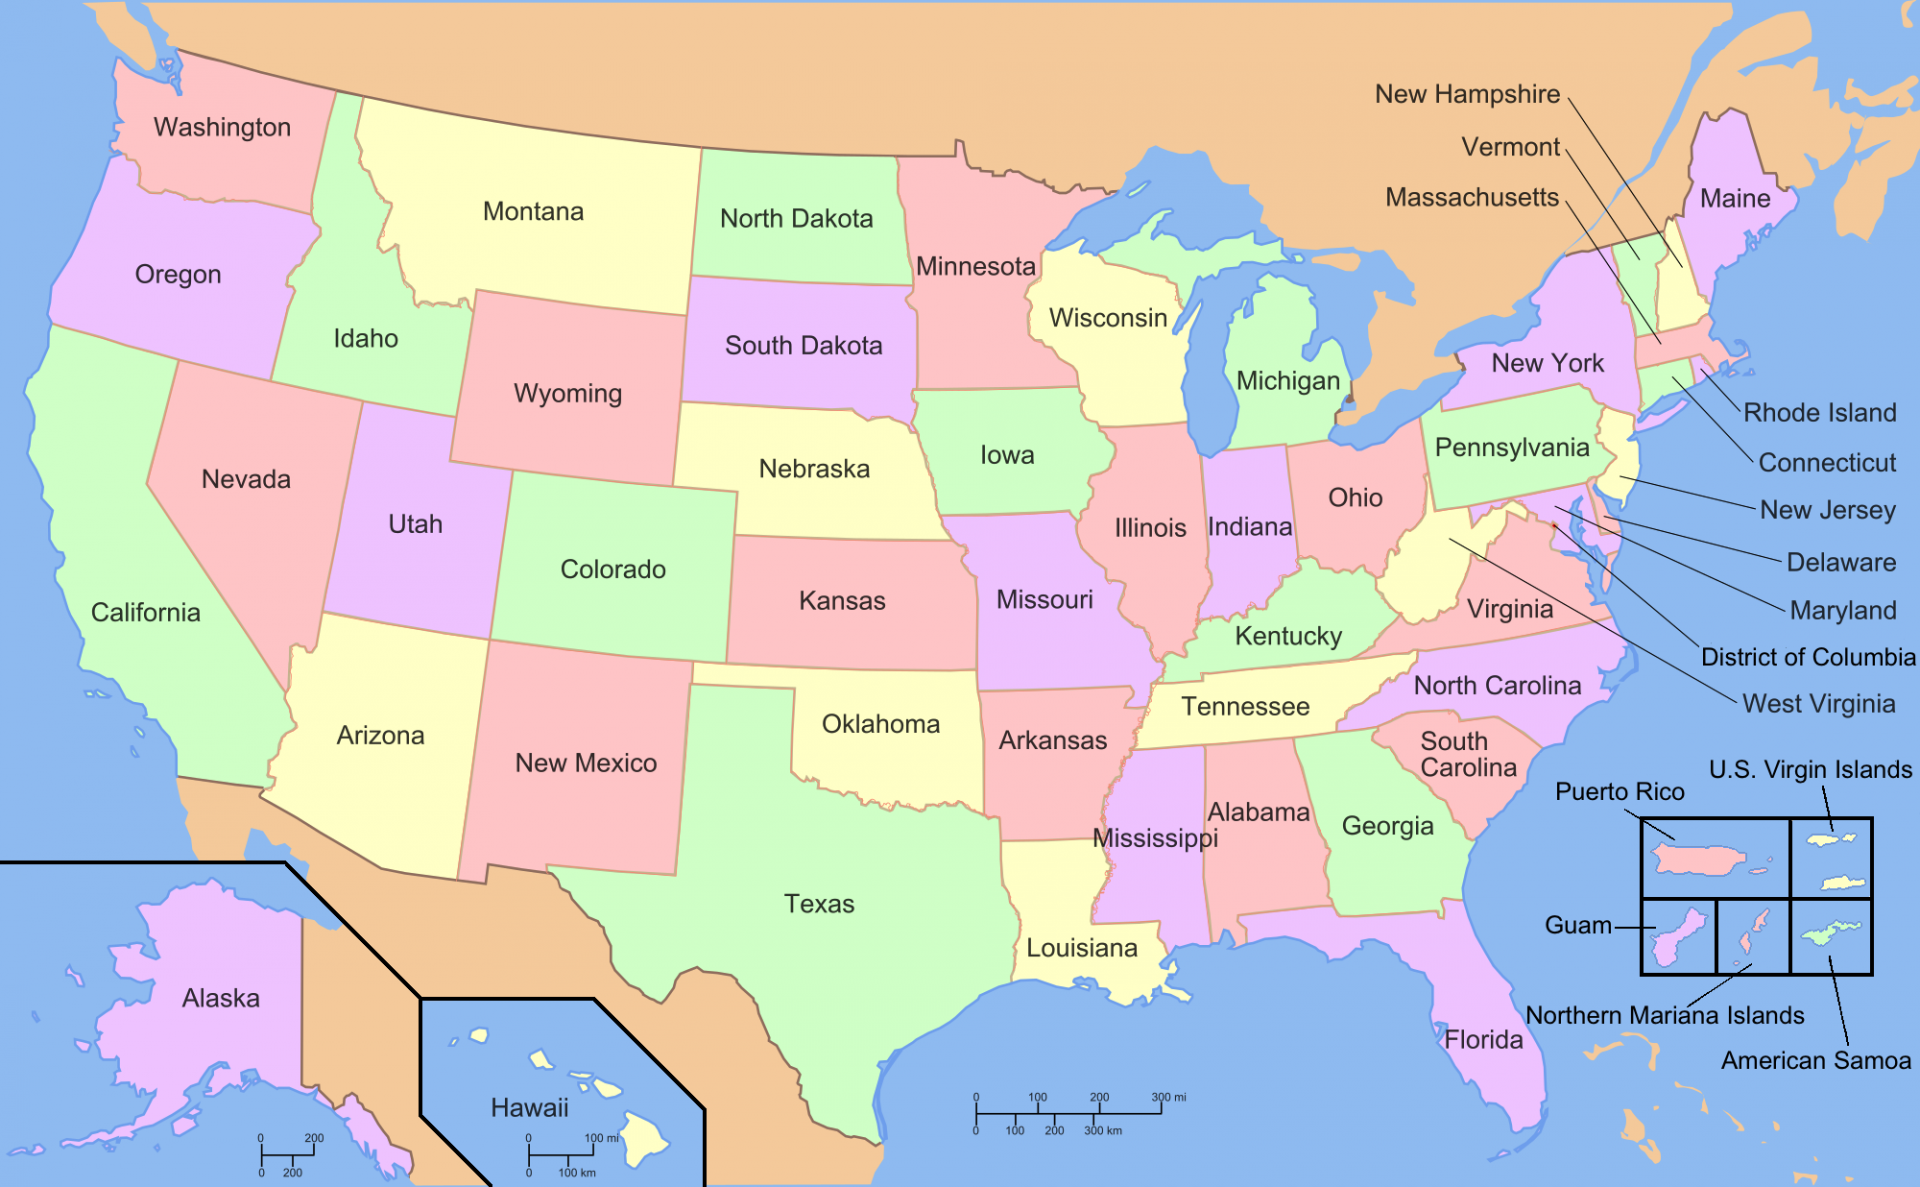 Top 7 most populous states in the US!